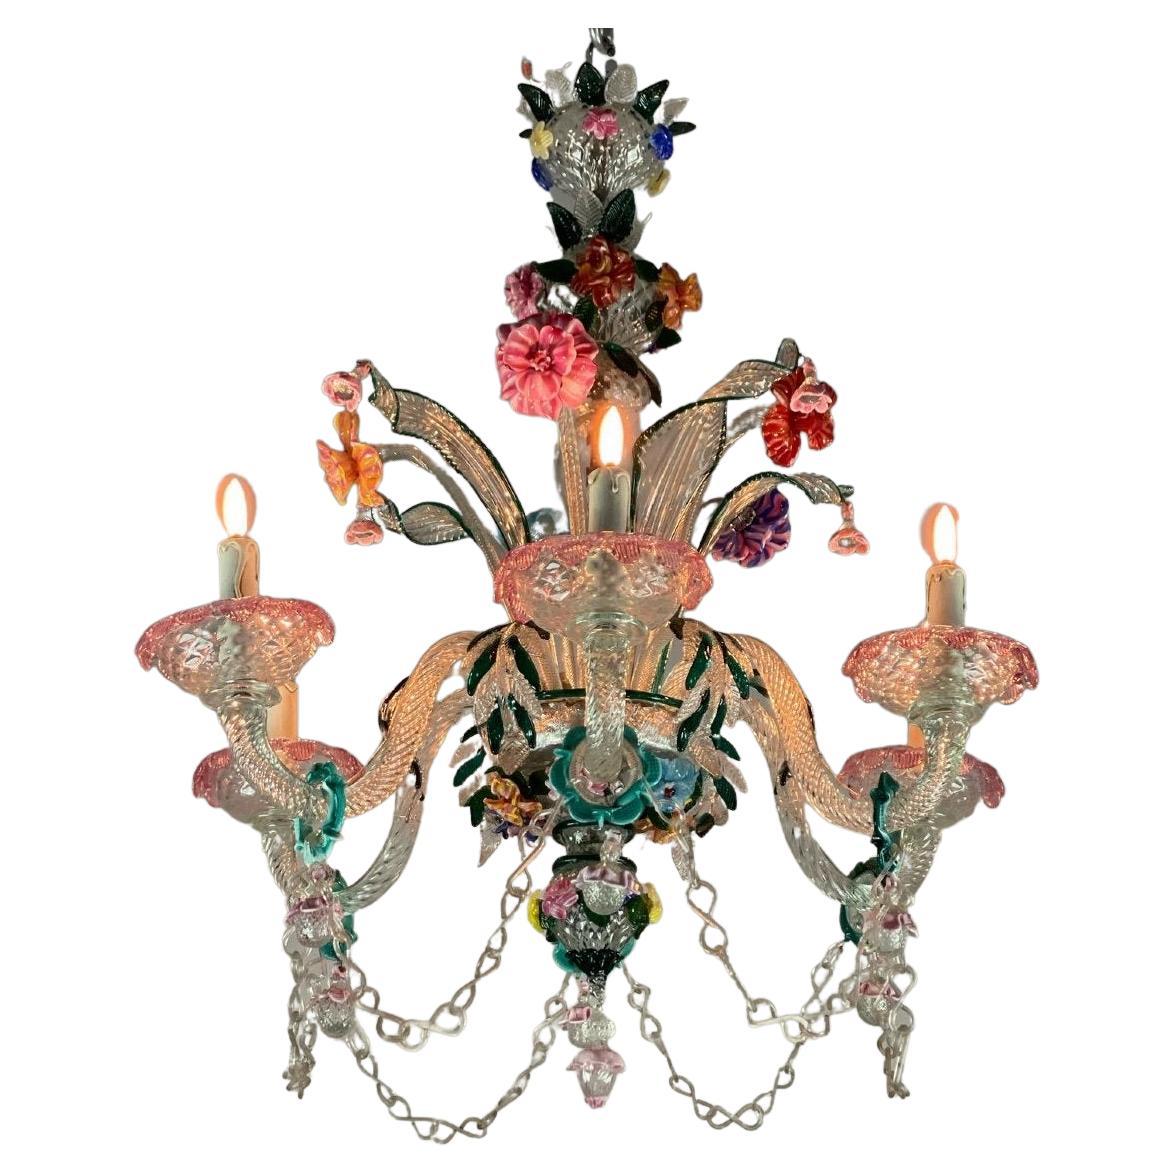  Venetian Chandeliers in Multicolored Murano Glass 6 Arms of Light